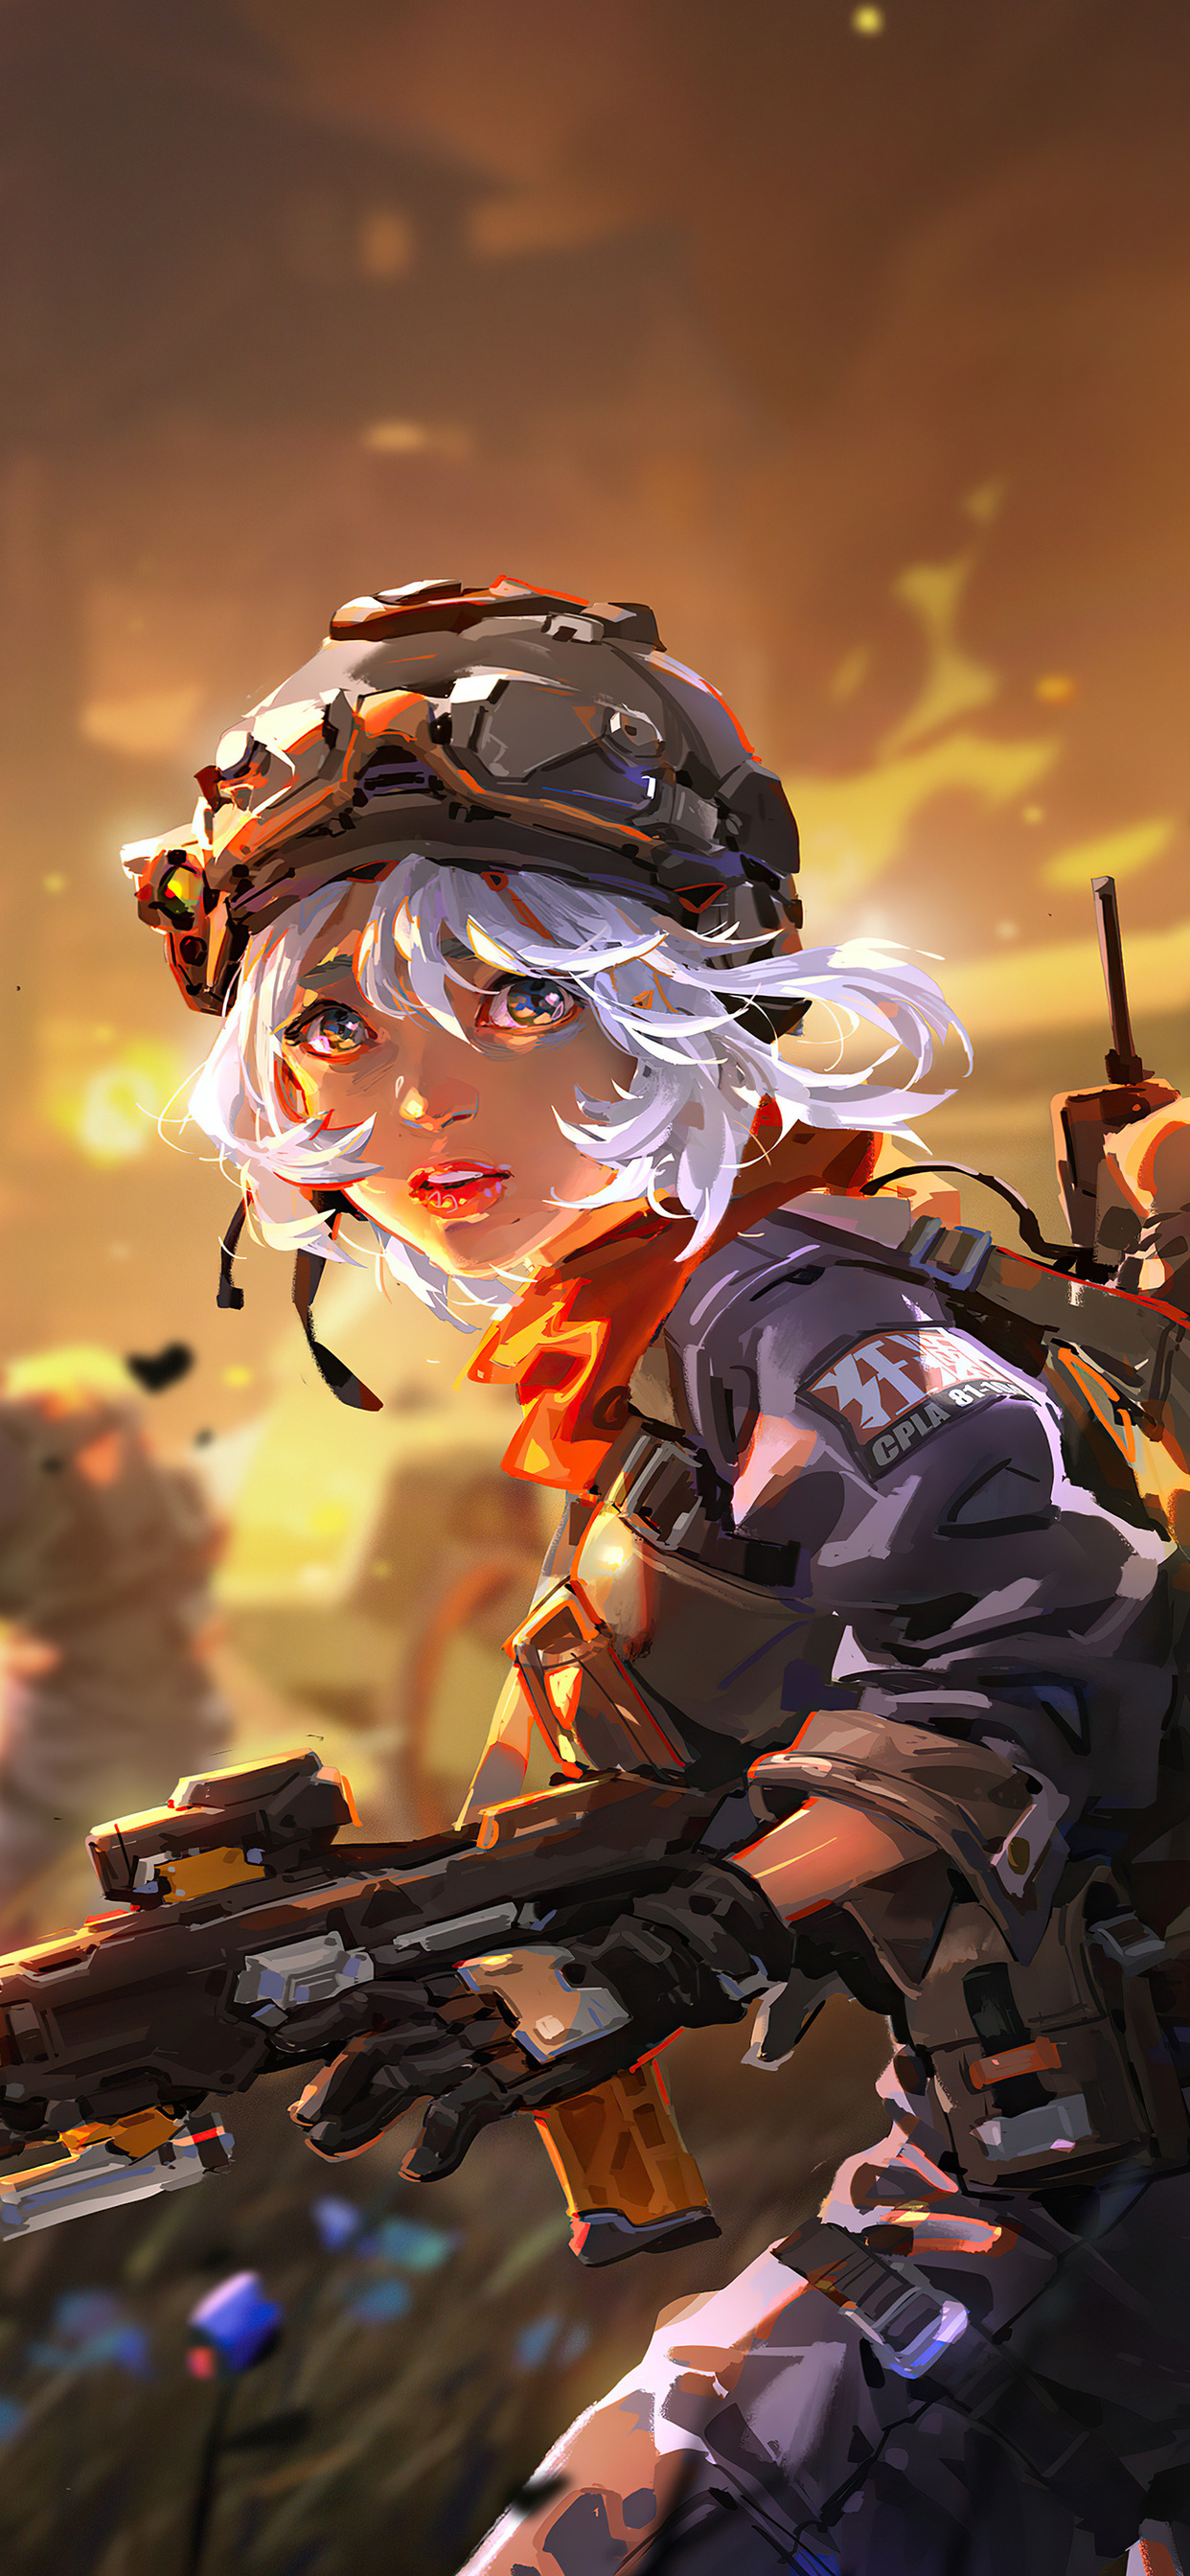 X summer soda anime girl in war k iphone xs max hd k wallpapers images backgrounds photos and pictures